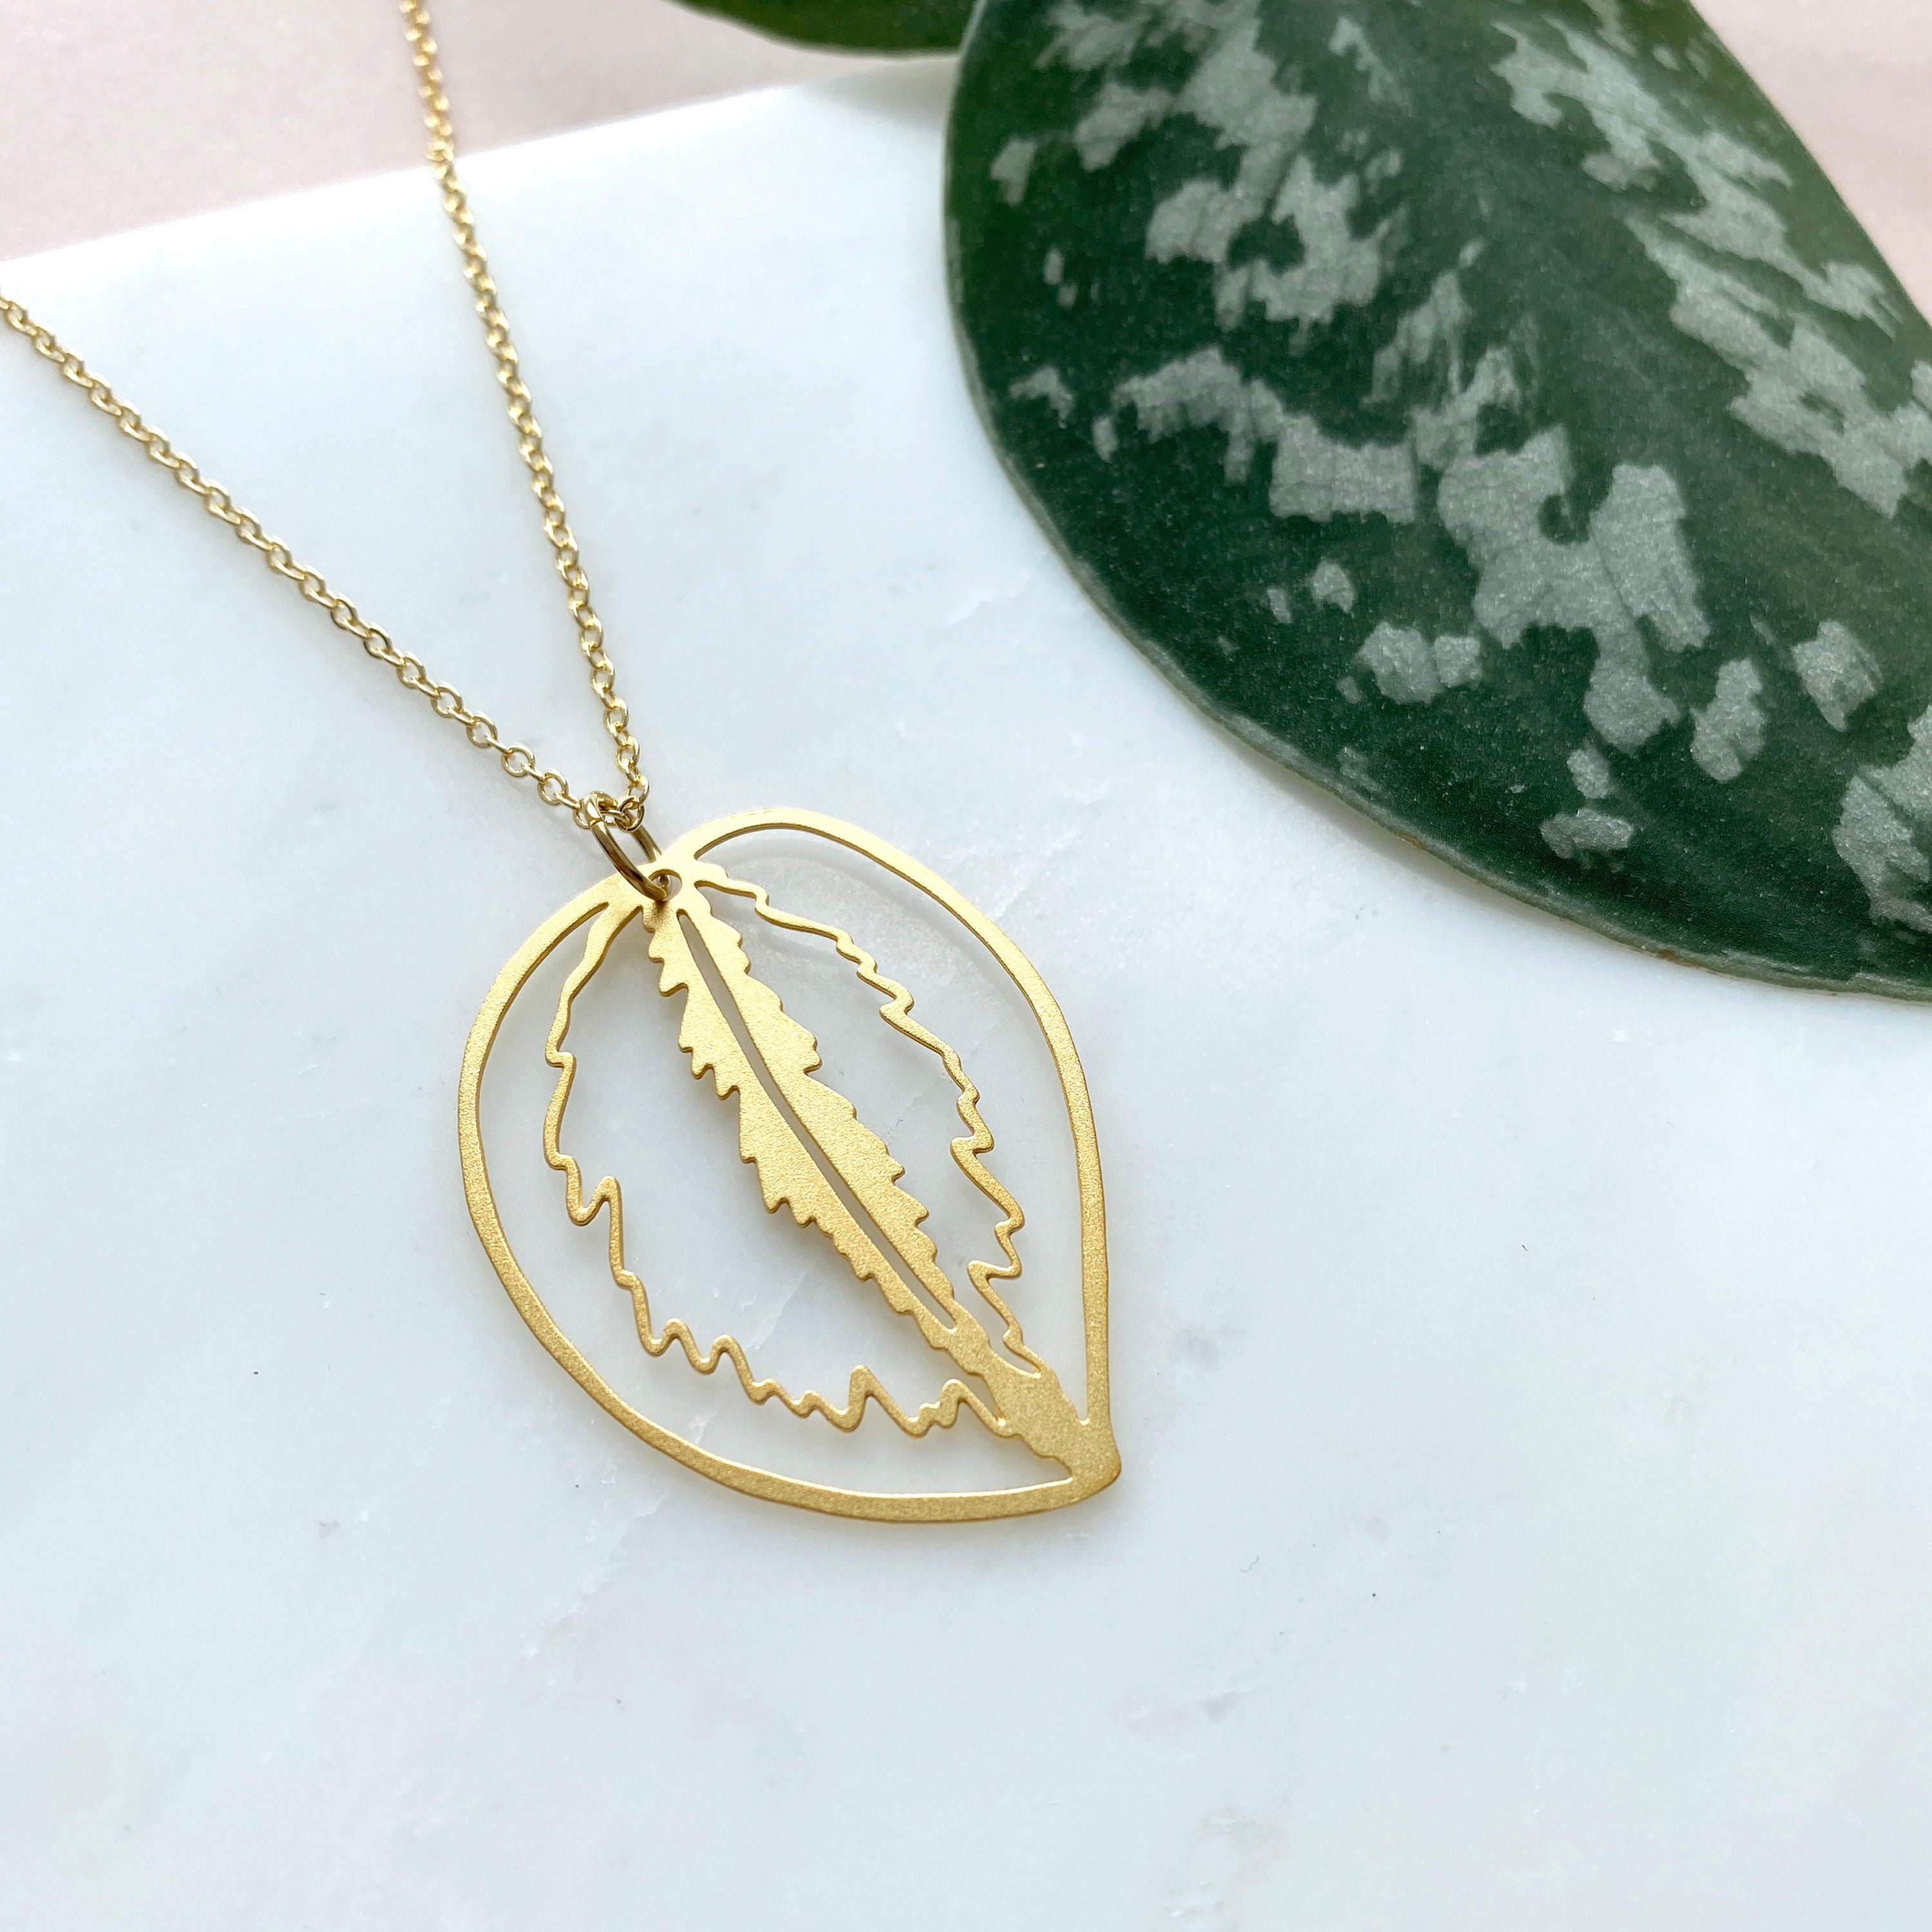 Gold Calathea Leaf Necklace - Simple Pendant Gift For Her House Plant Jewellery